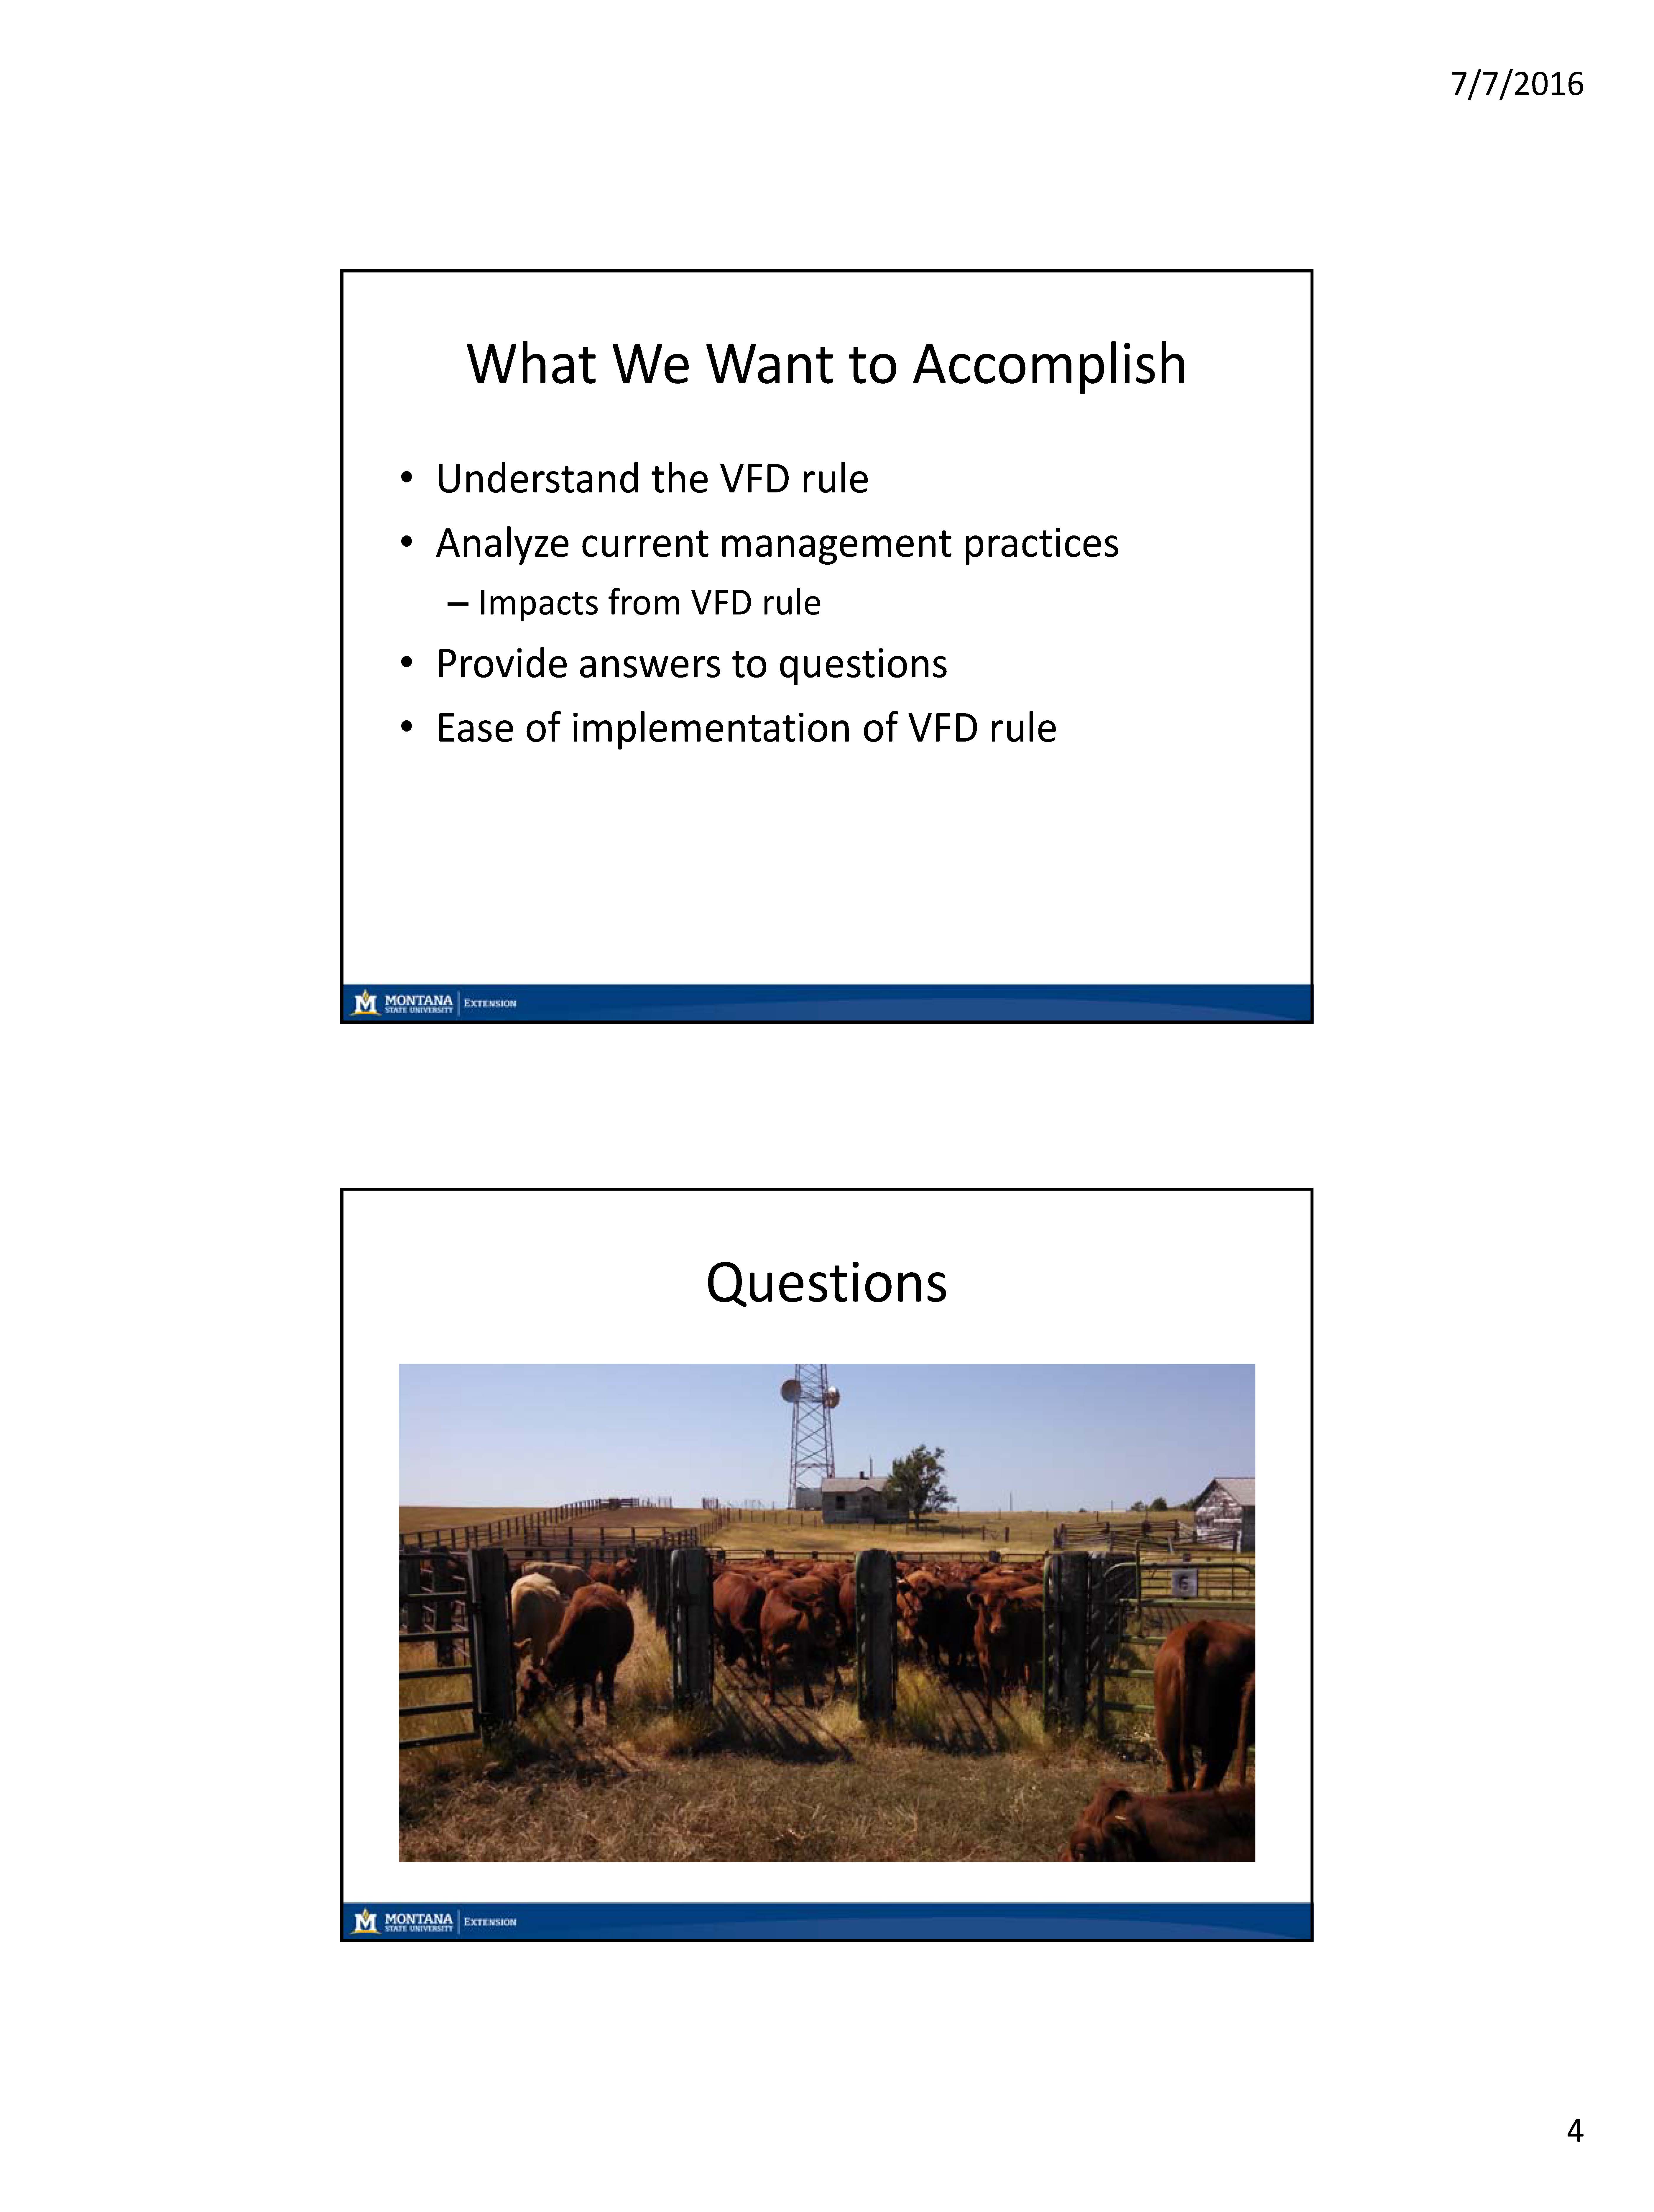 Introductory slides from a presentation about the Veterinary Feed Directive short course.